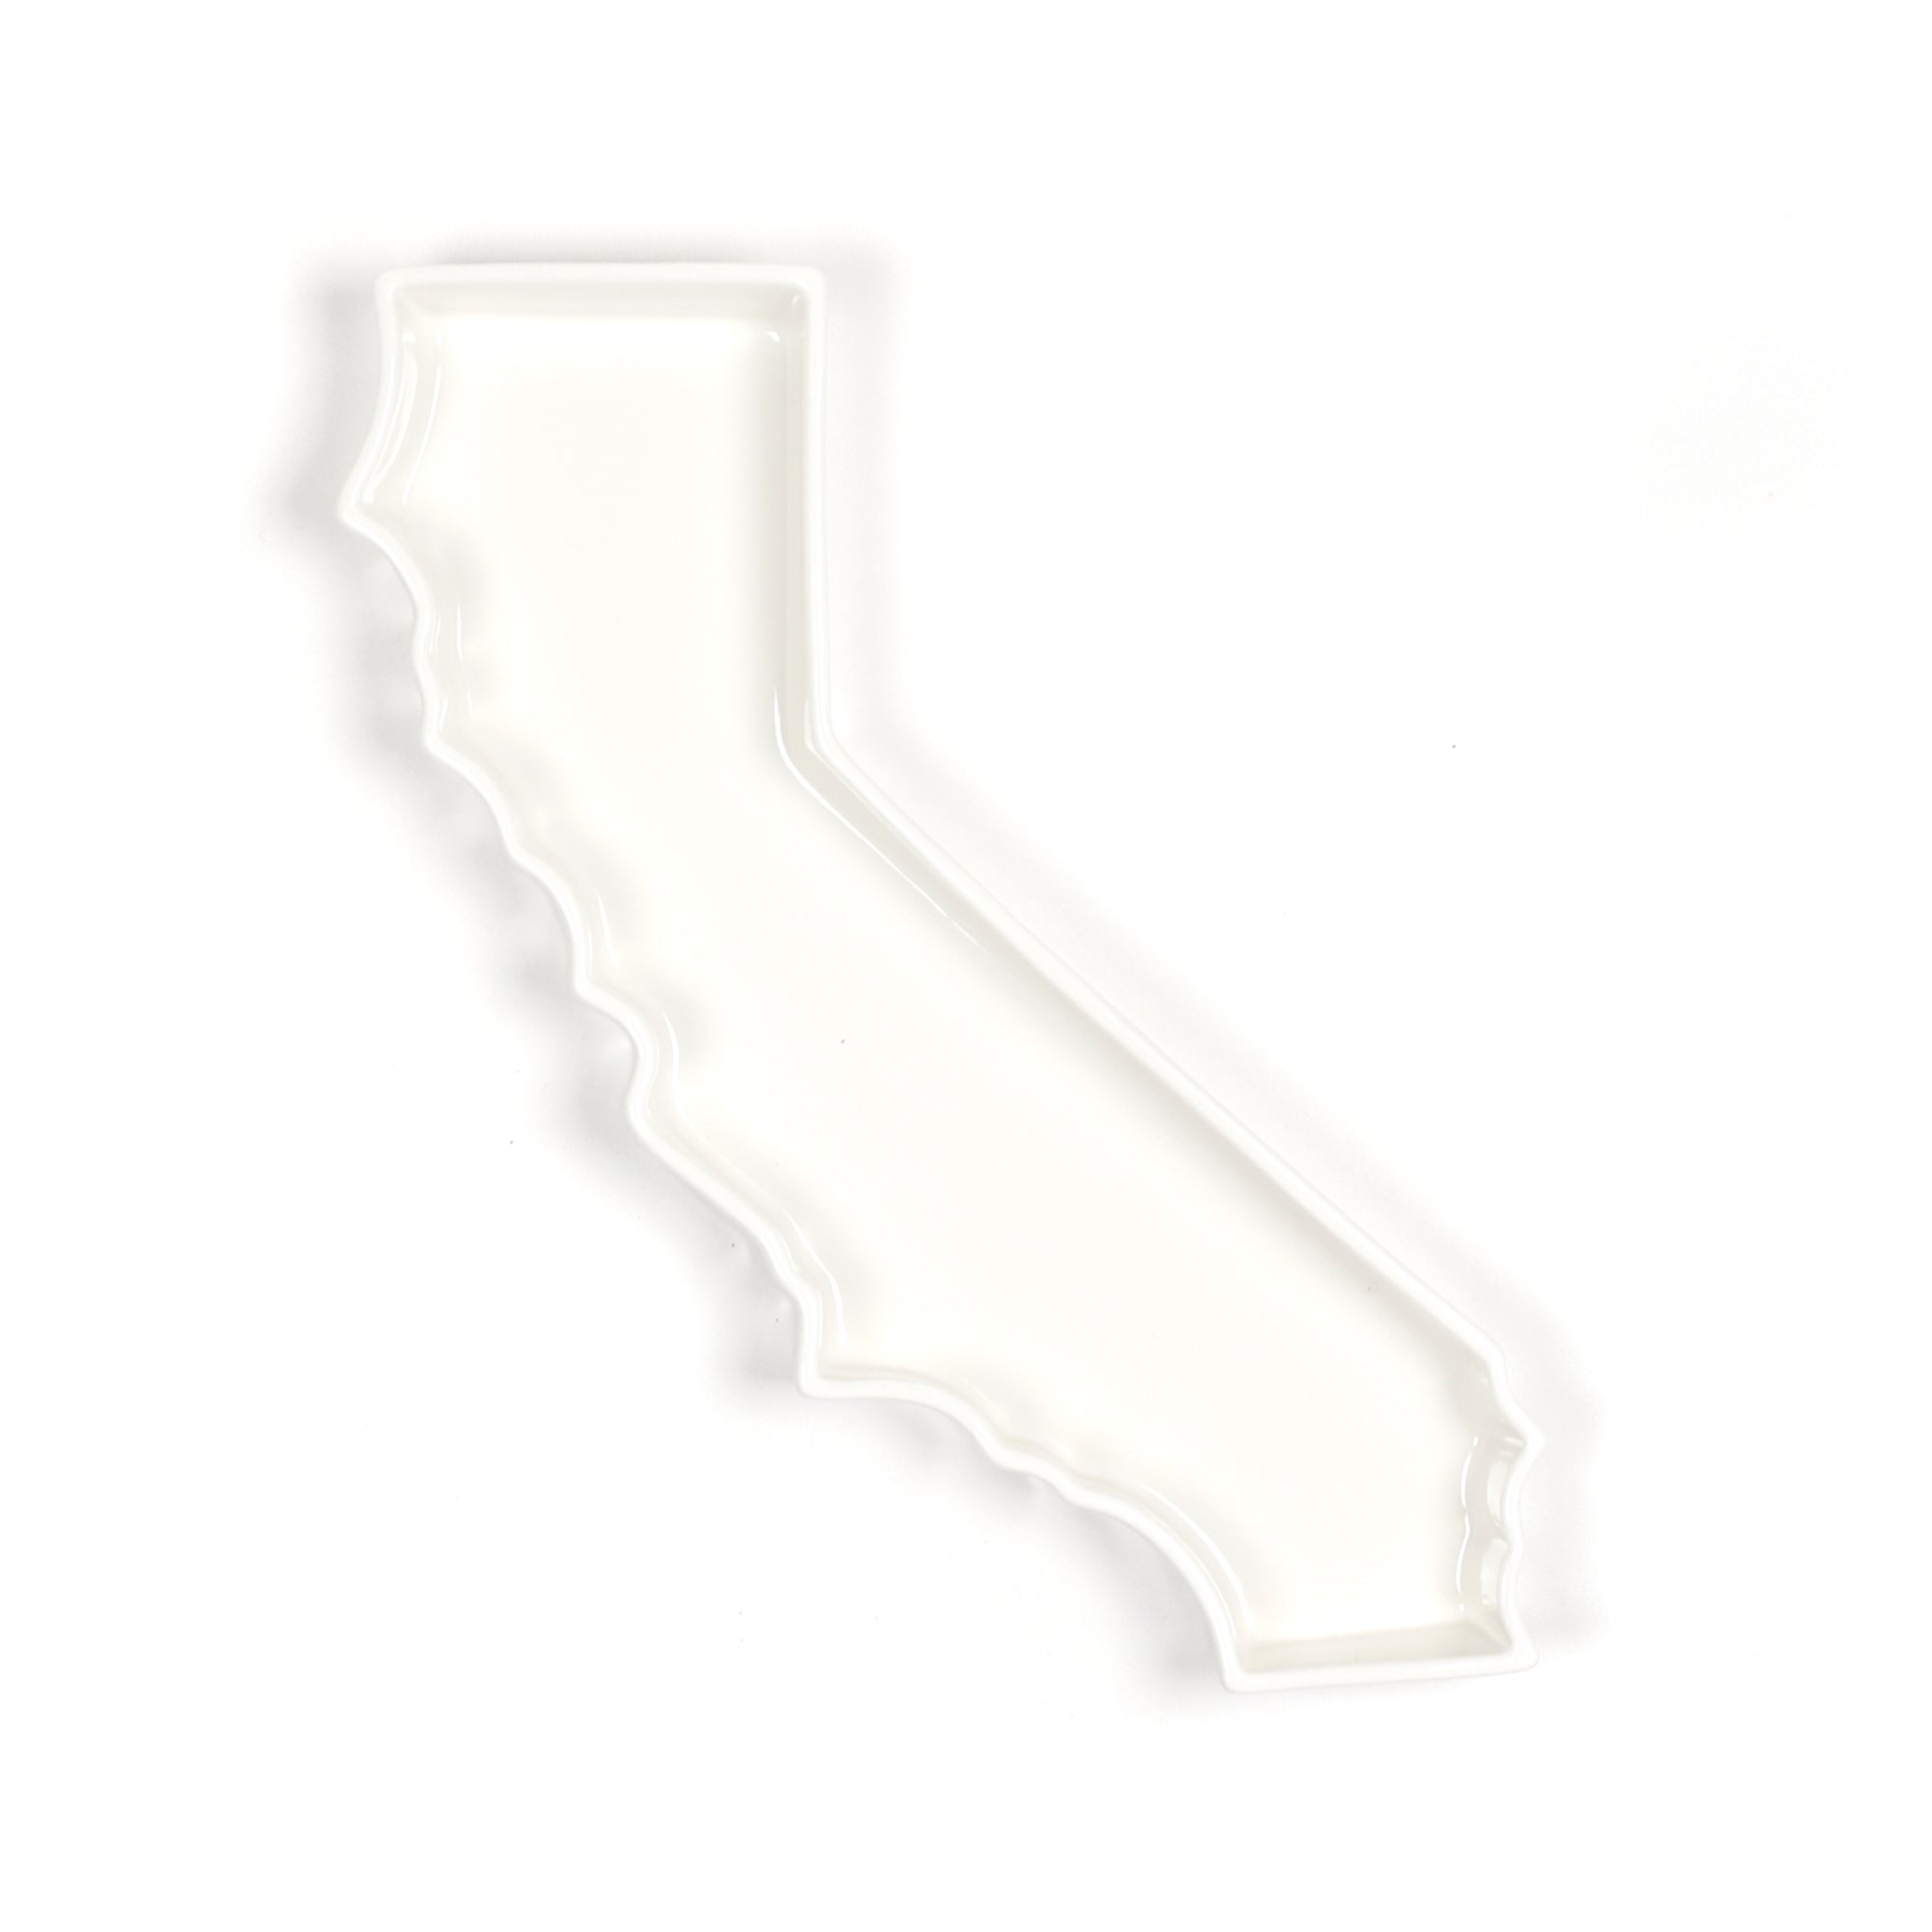 California state plate in white glossy porcelain, safe for cooking and food use.